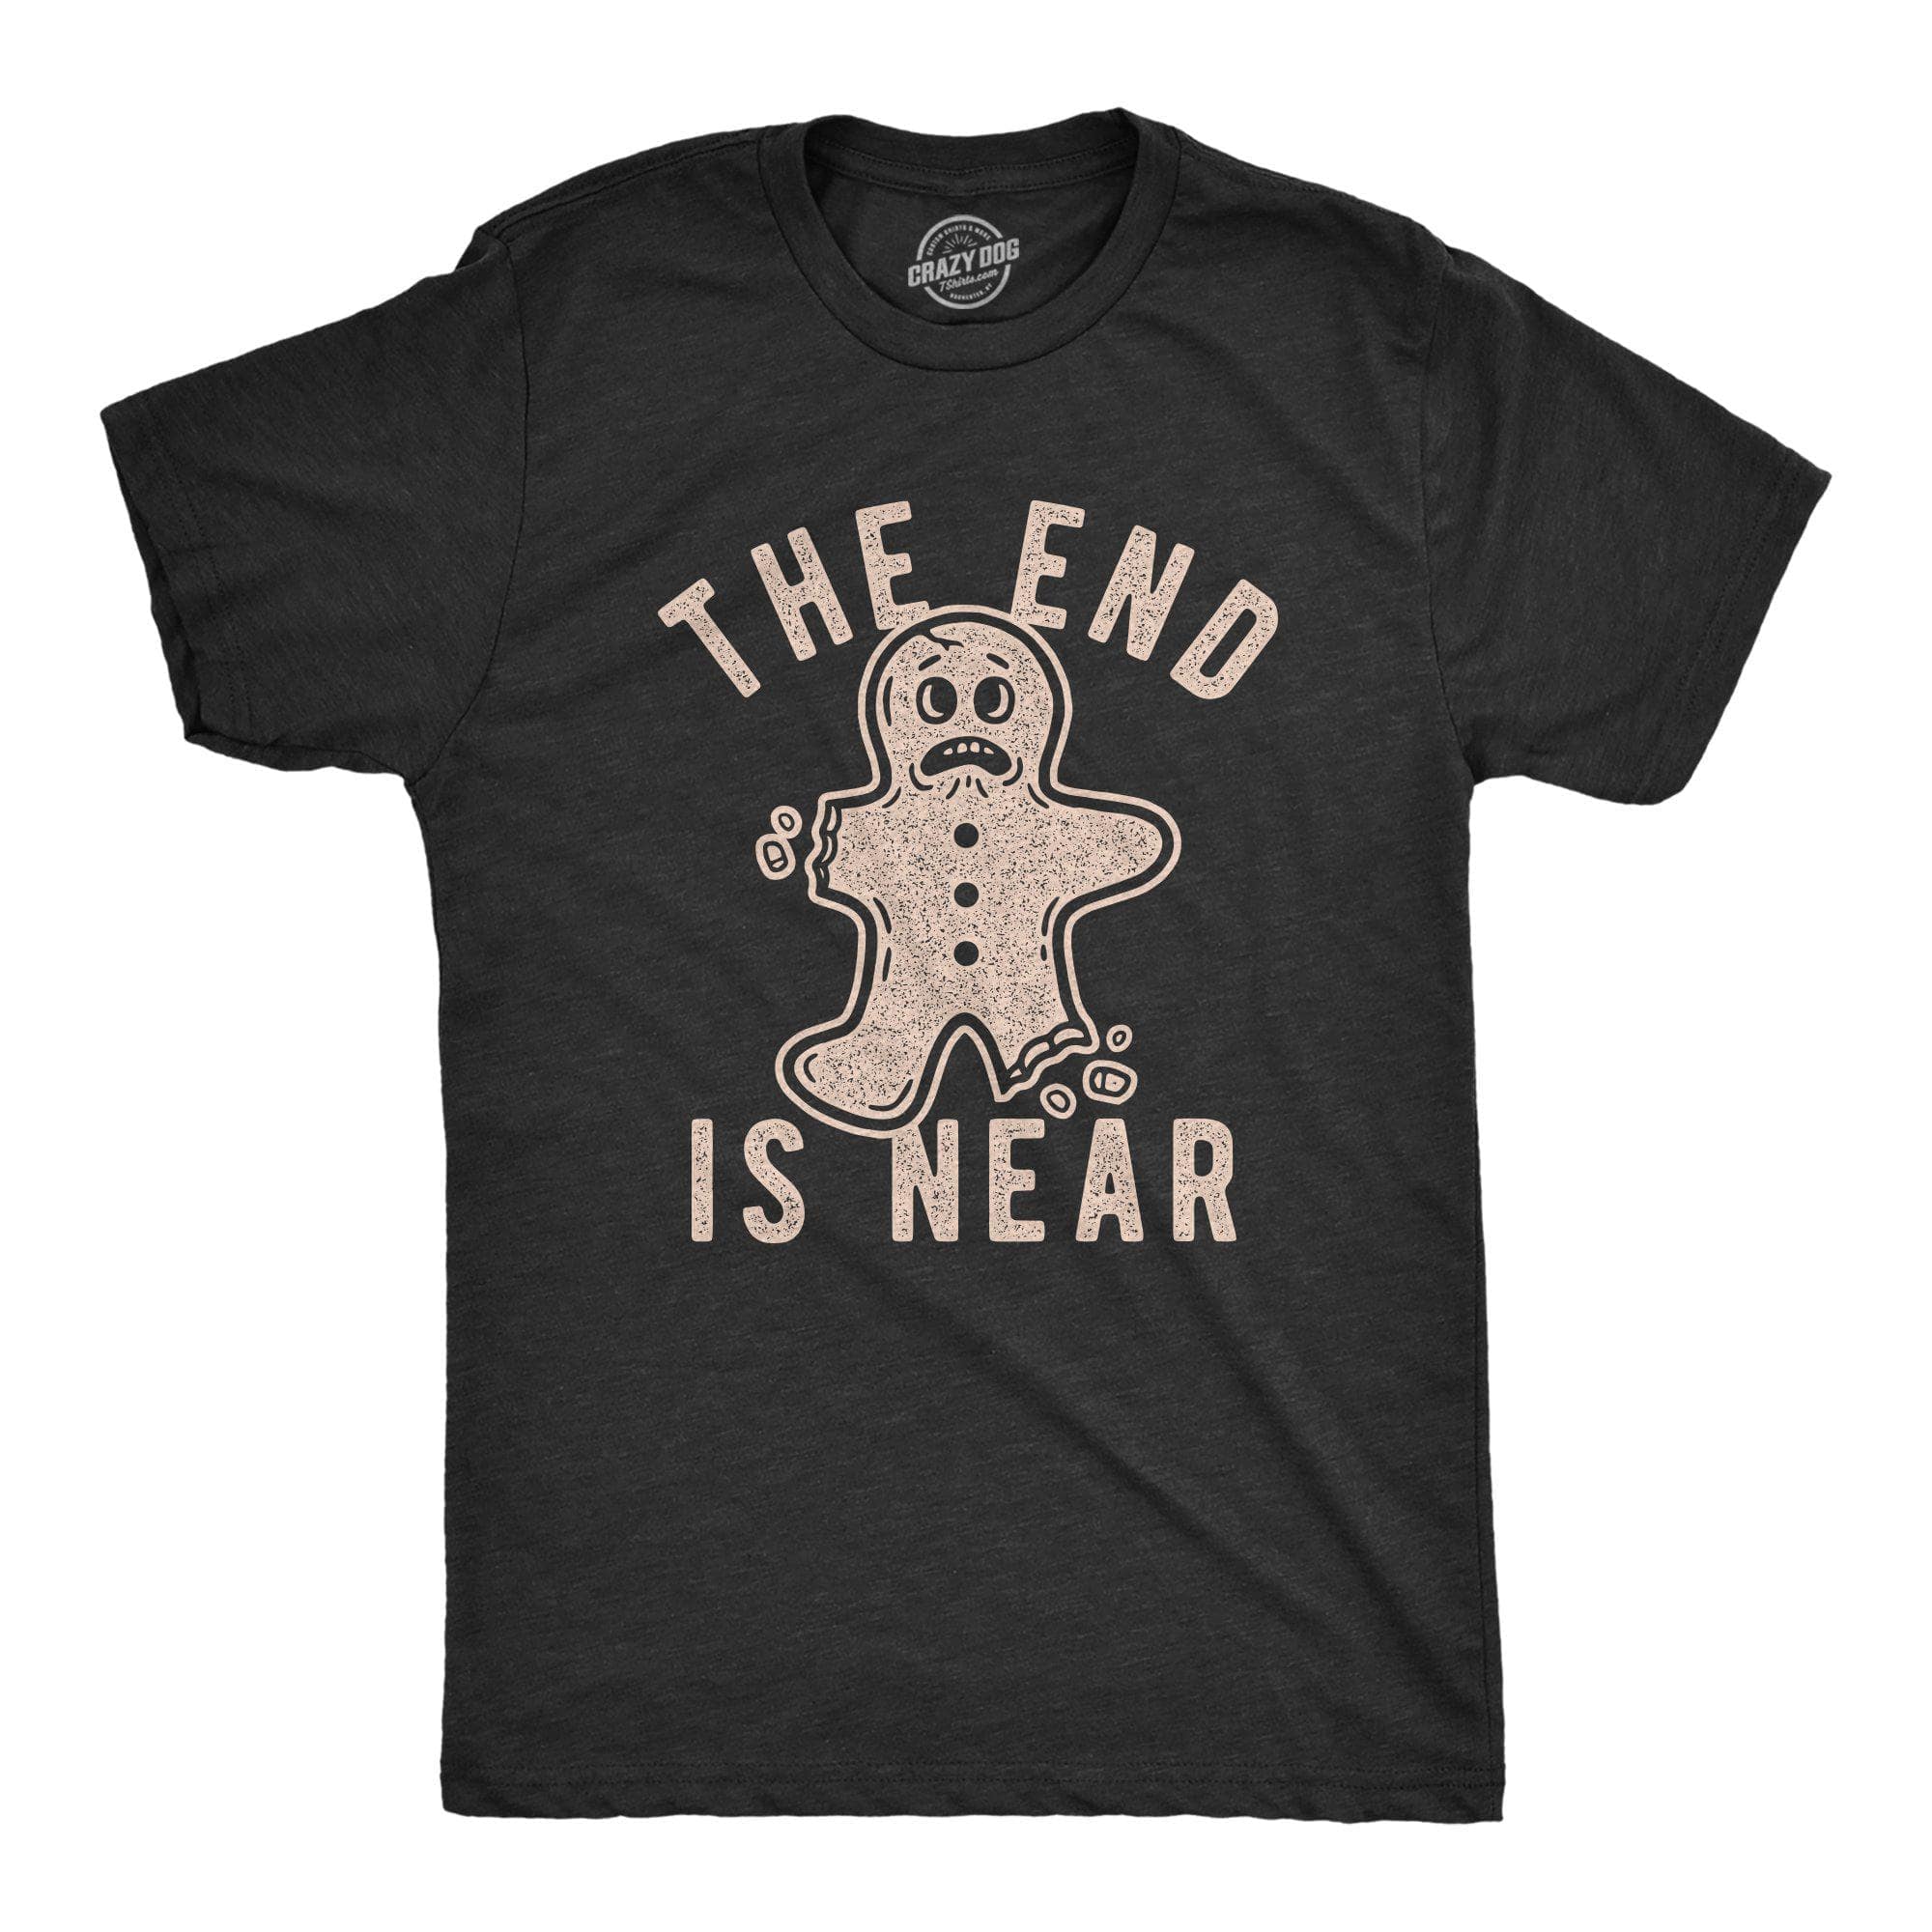 The End Is Near Gingerbread Men's Tshirt - Crazy Dog T-Shirts